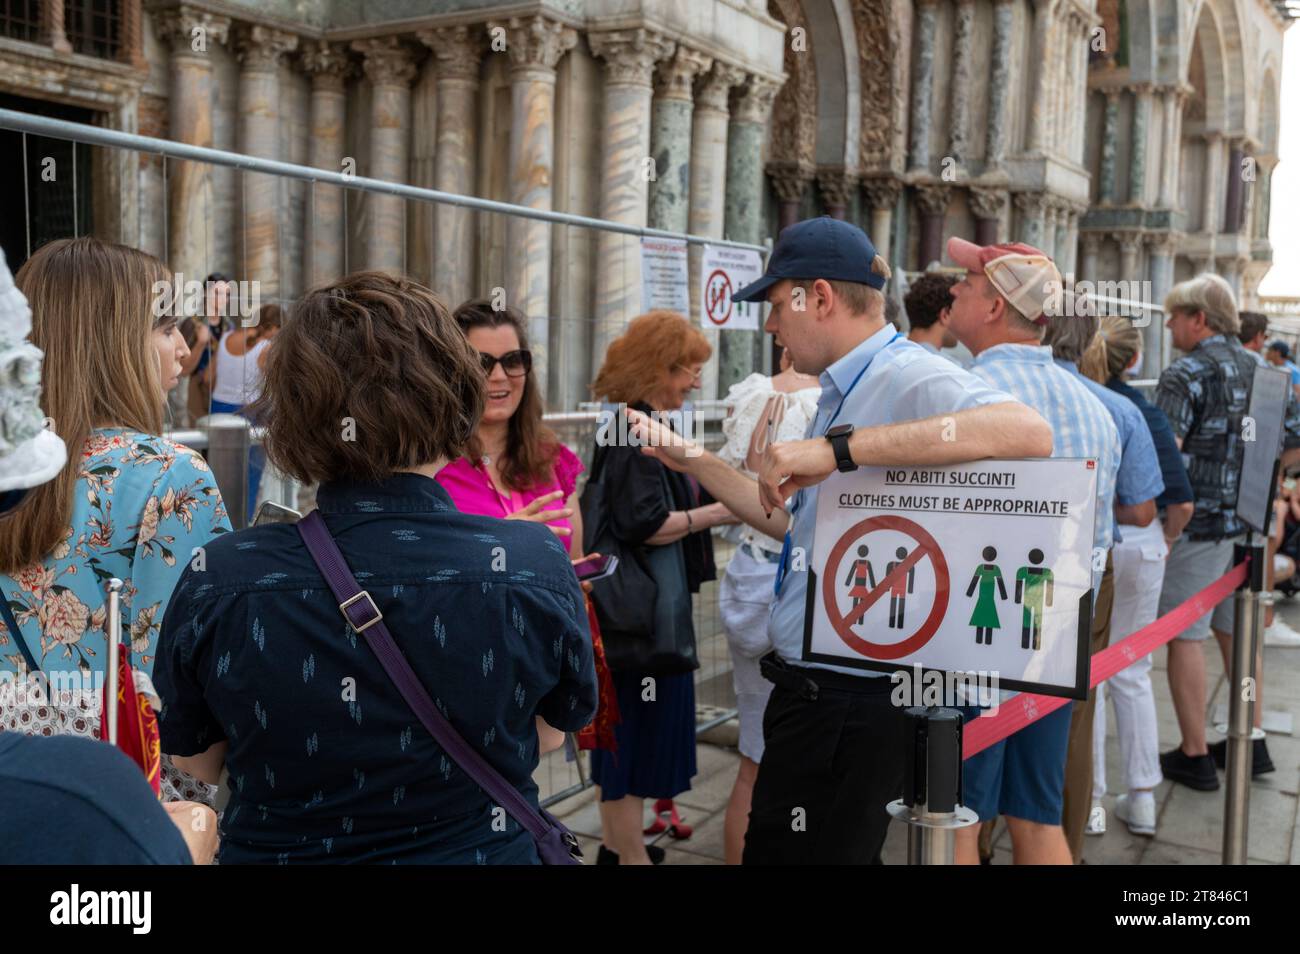 A security check, and also on women’s dress code before entering at the main visitor’s entrance to the Basilica di San Marco, (Saint Mark's Basilica) Stock Photo